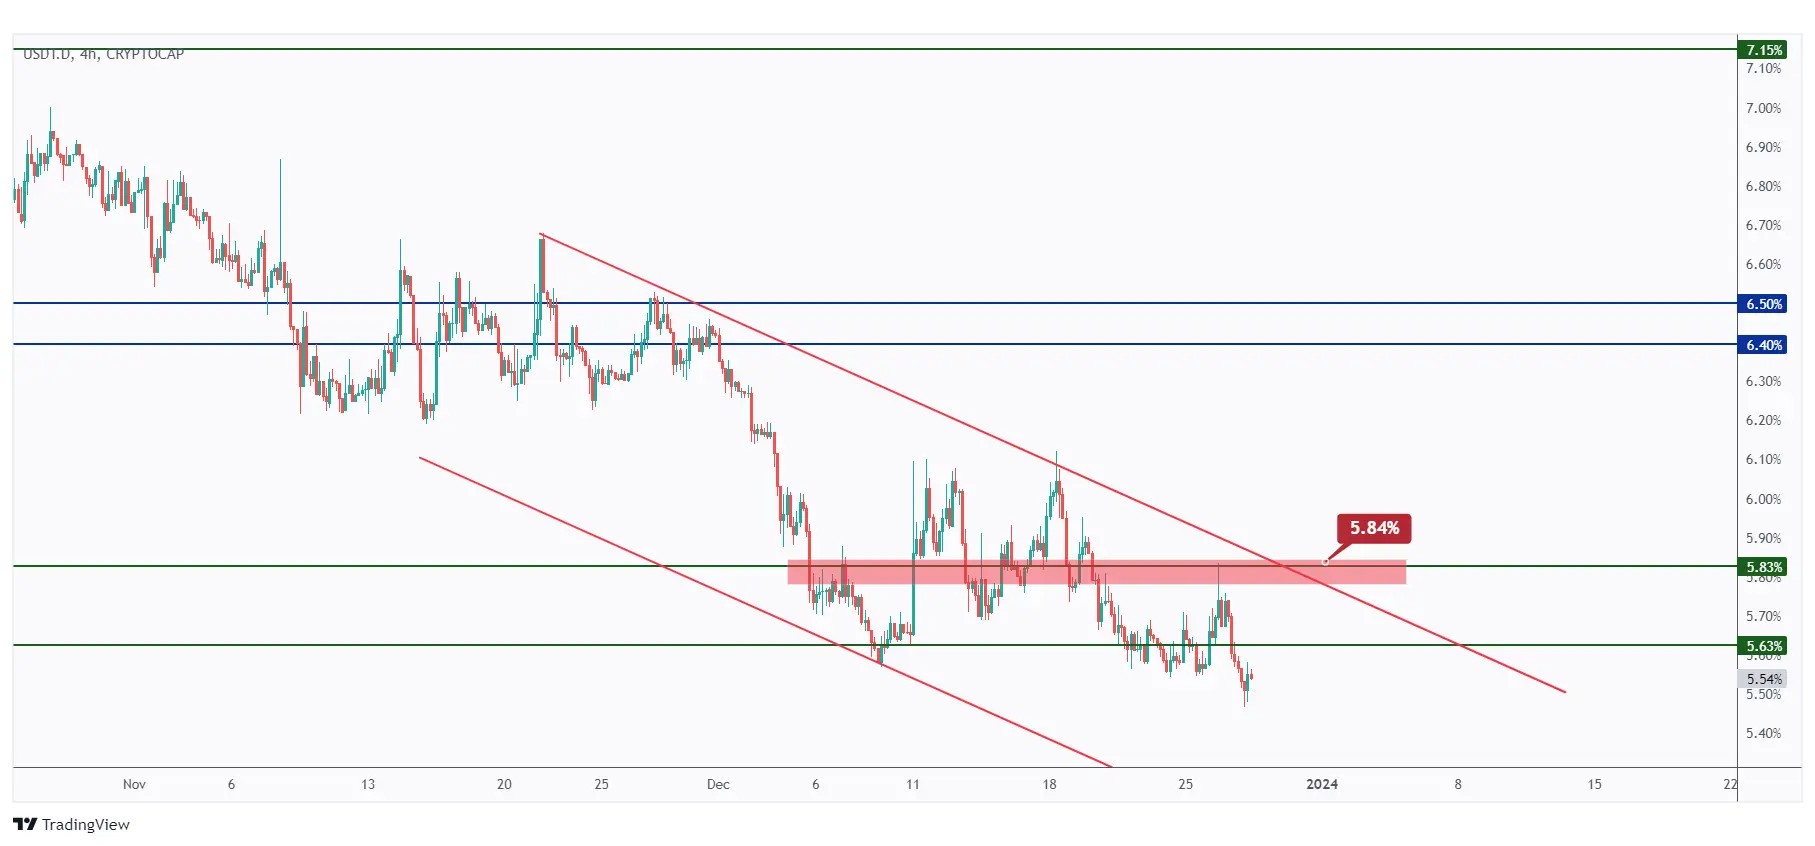 USDT dominance showing the bearish trend inside the falling channel